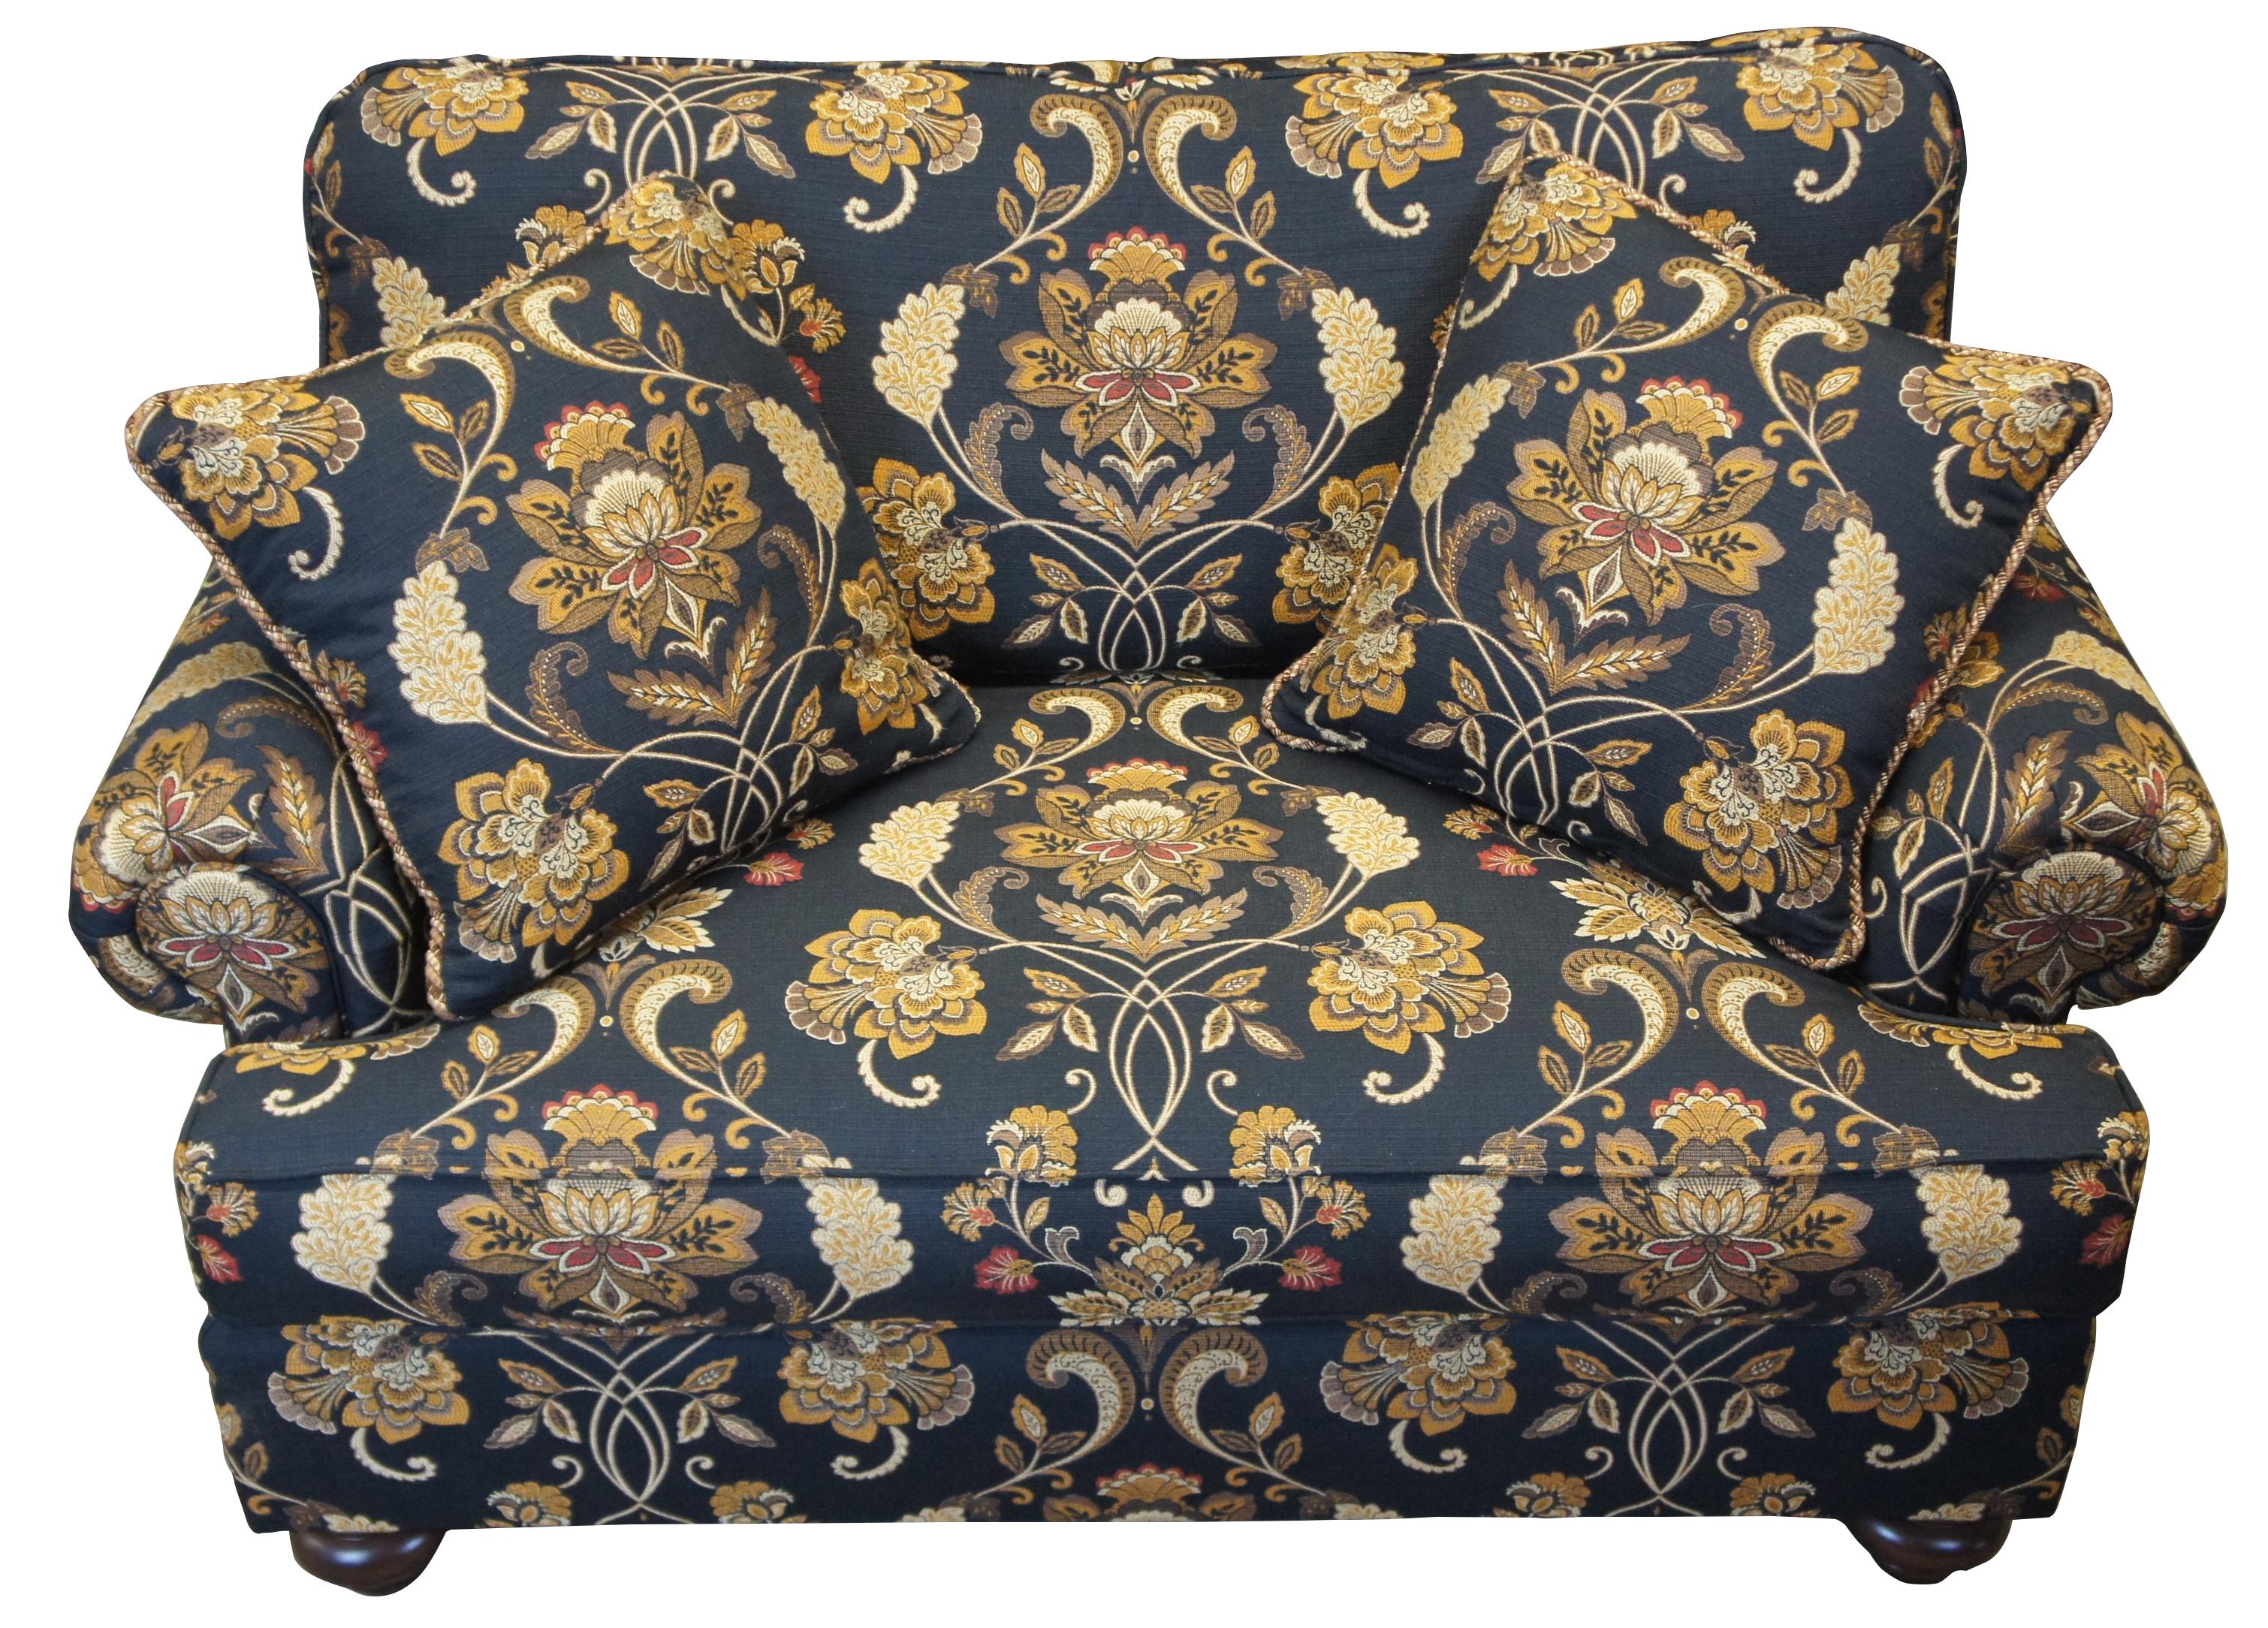 Henredon upholstery collection navy blue and gold floral sofa. Features Natchez finish with rolled arms and throw pillows. Product # H2000-S. Measures: 58”.
 